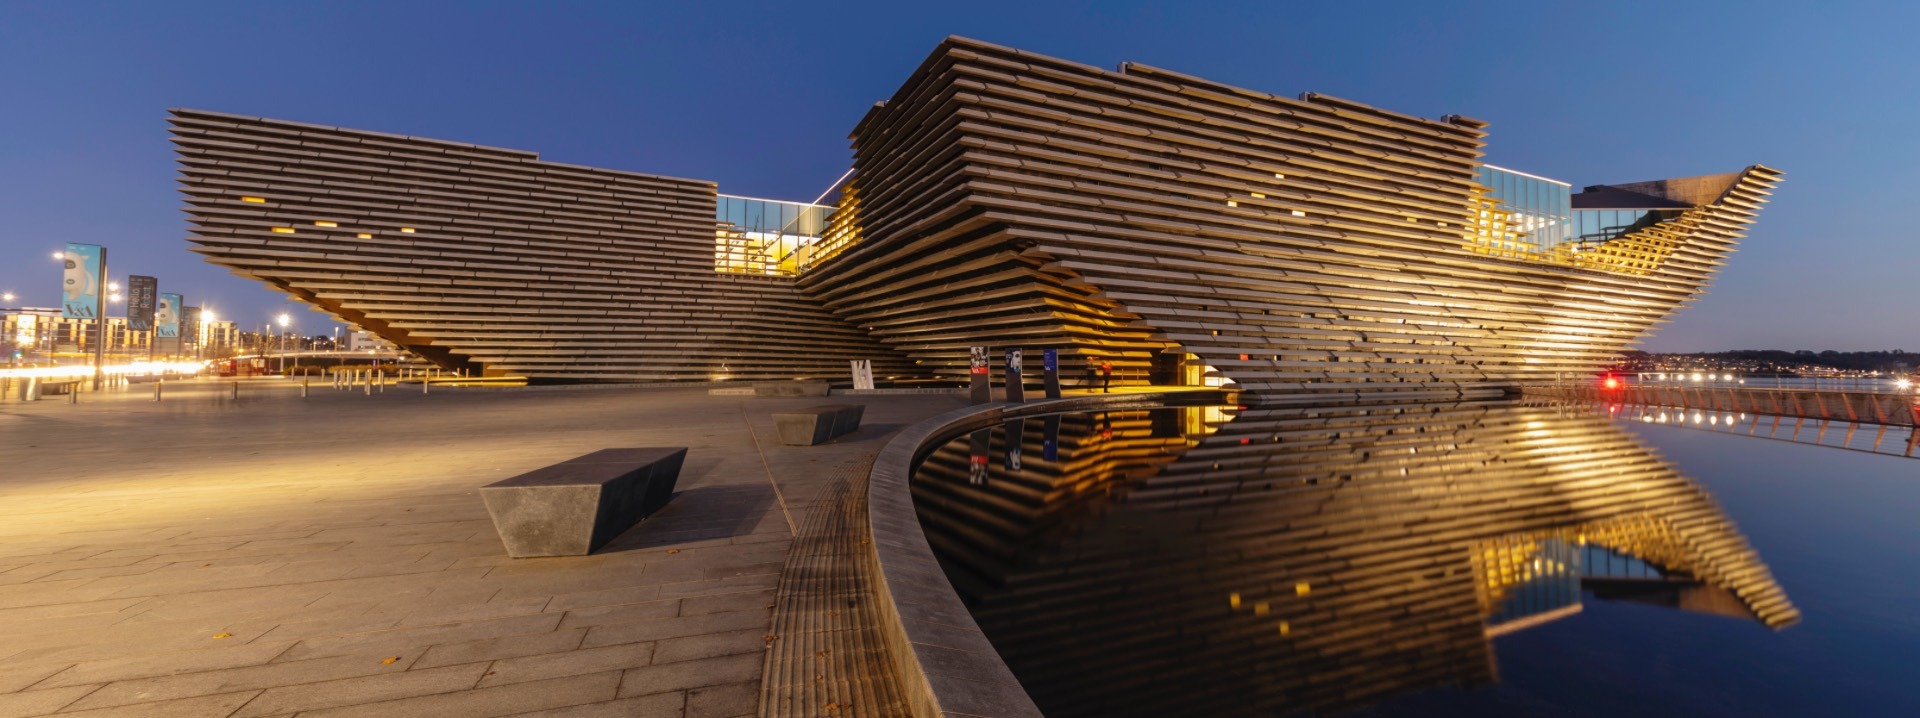 The exterior of the V&A: Dundee at night